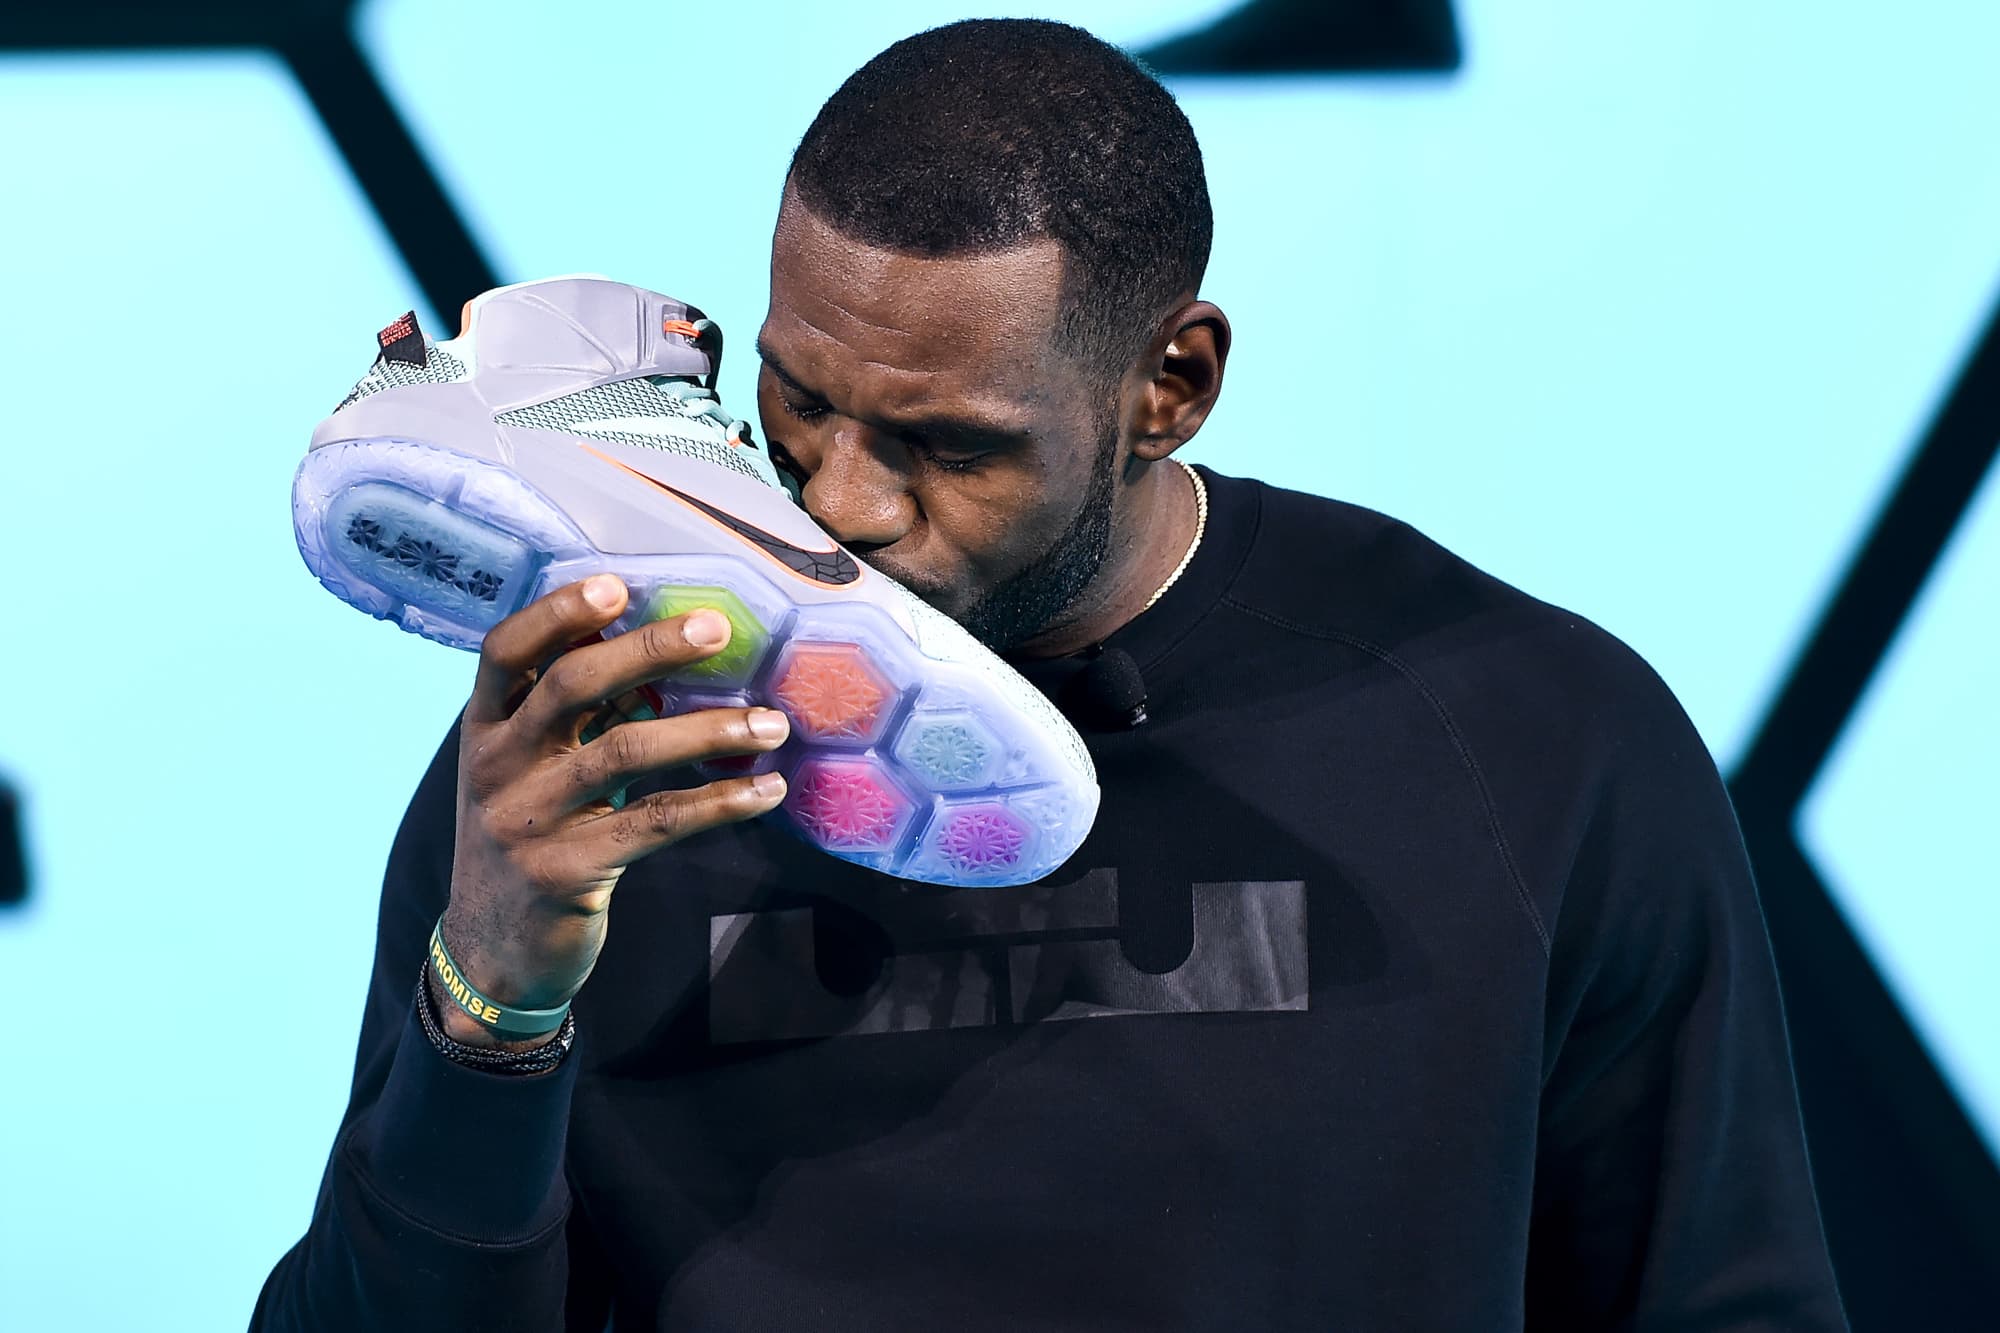 shoes for lebron james